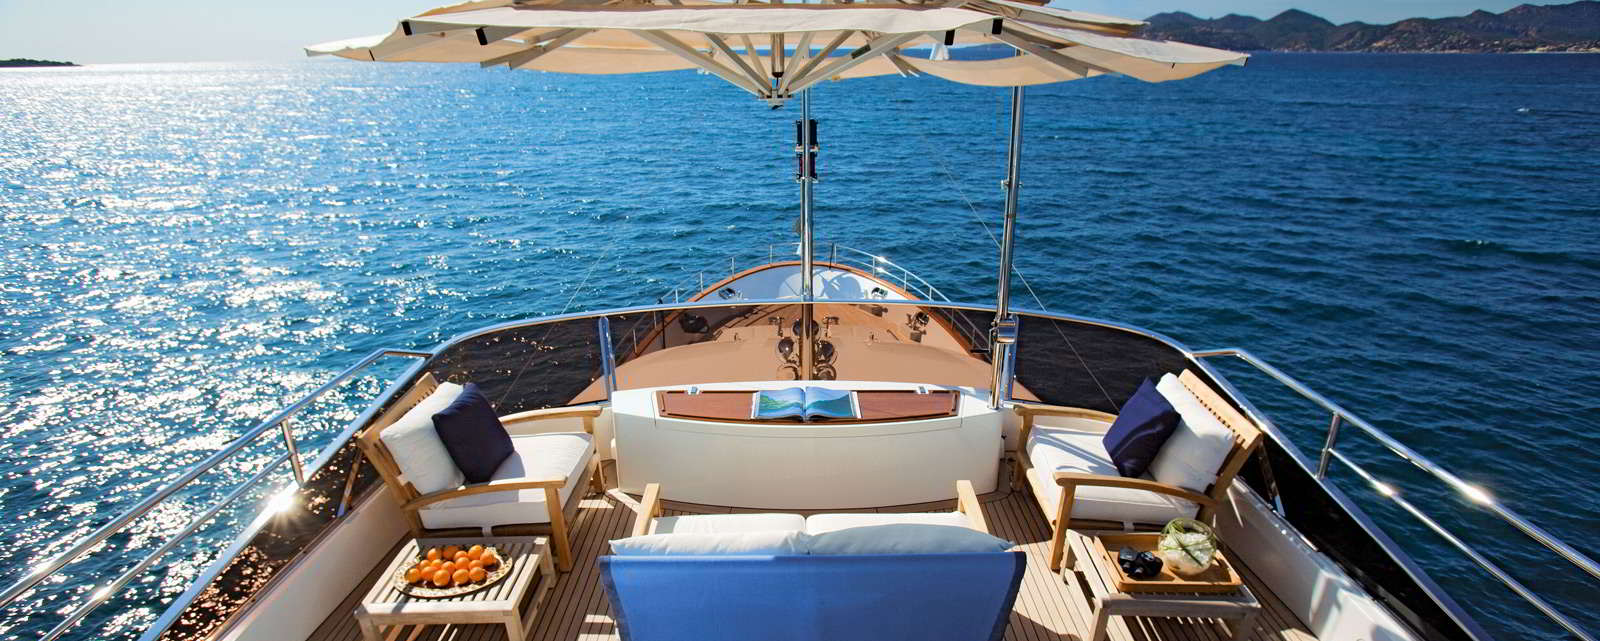 France Luxury Boat Holidays with In Luxe Travel France, the France Luxury Travel Specialist